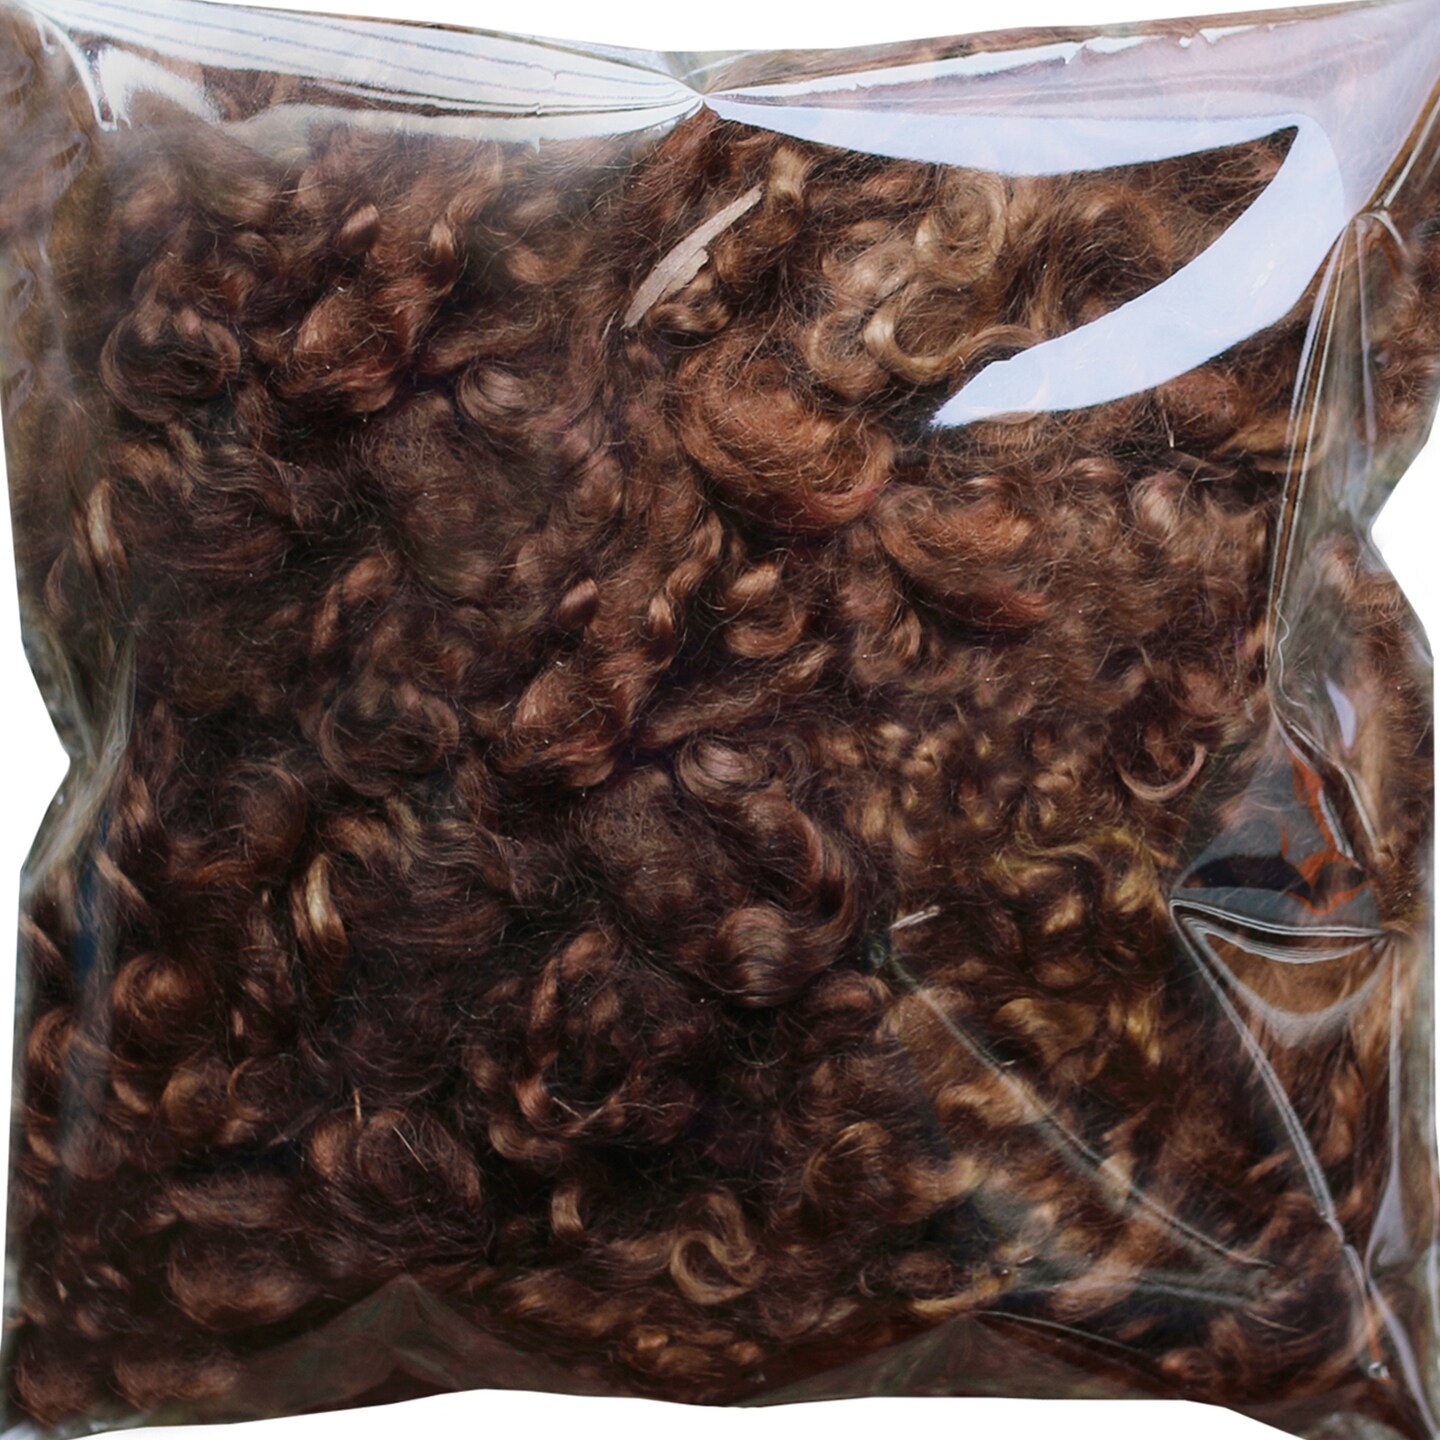 BROWN MOHAIR LOCKS. Organic Hand-Dyed Curly Wool for Rooting Doll Hair, Felting, Blending, Spinning. 1oz